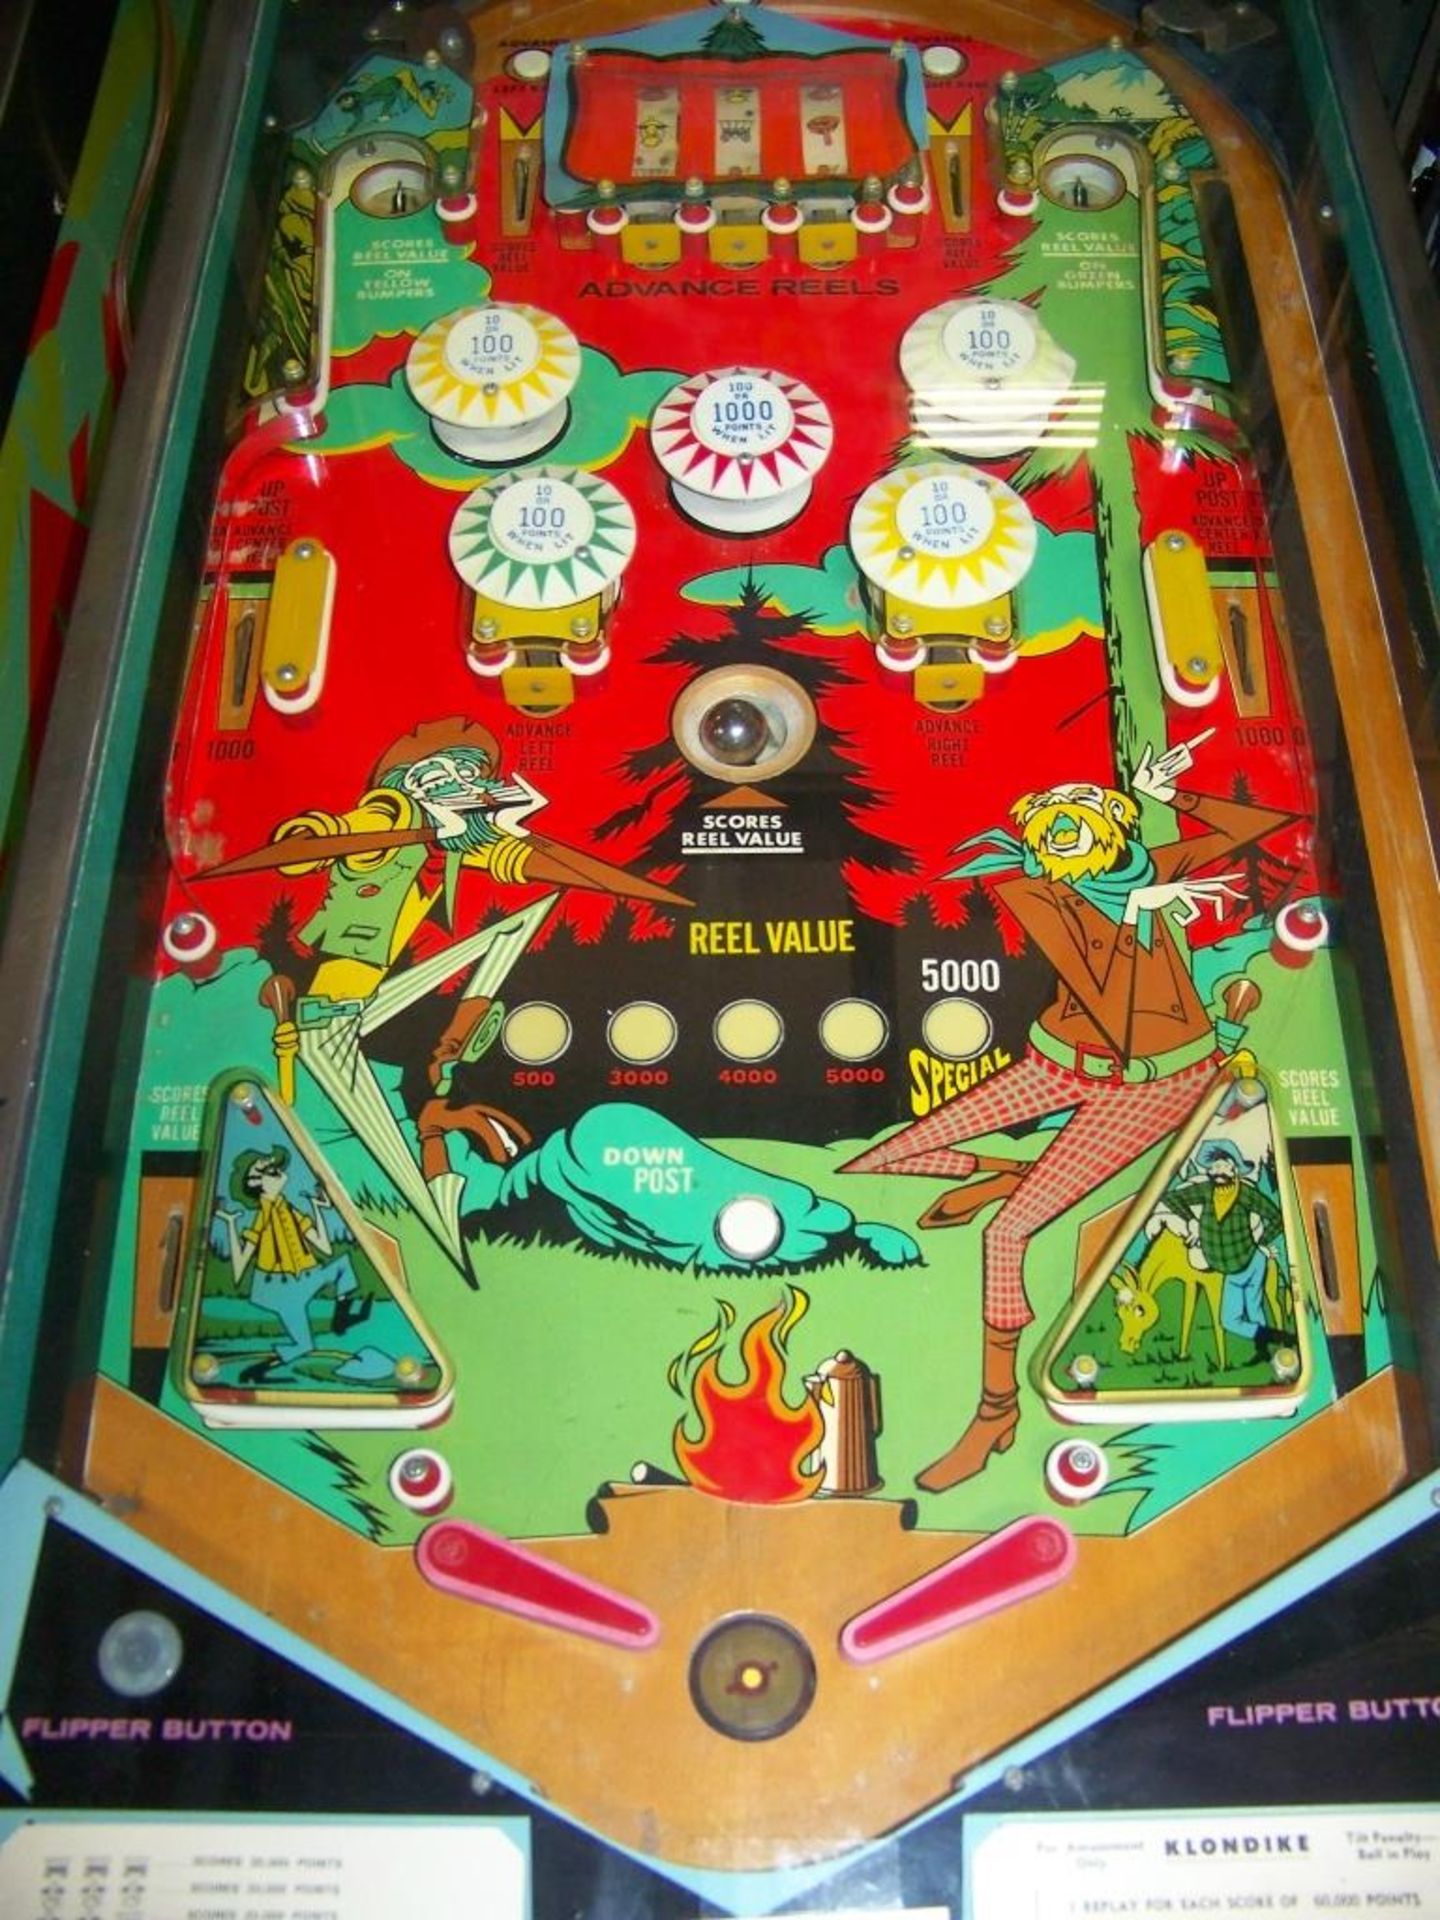 KLONDIKE PINBALL MACHINE WILLIAMS 1971 Item is in used condition. Evidence of wear and commercial - Image 3 of 5